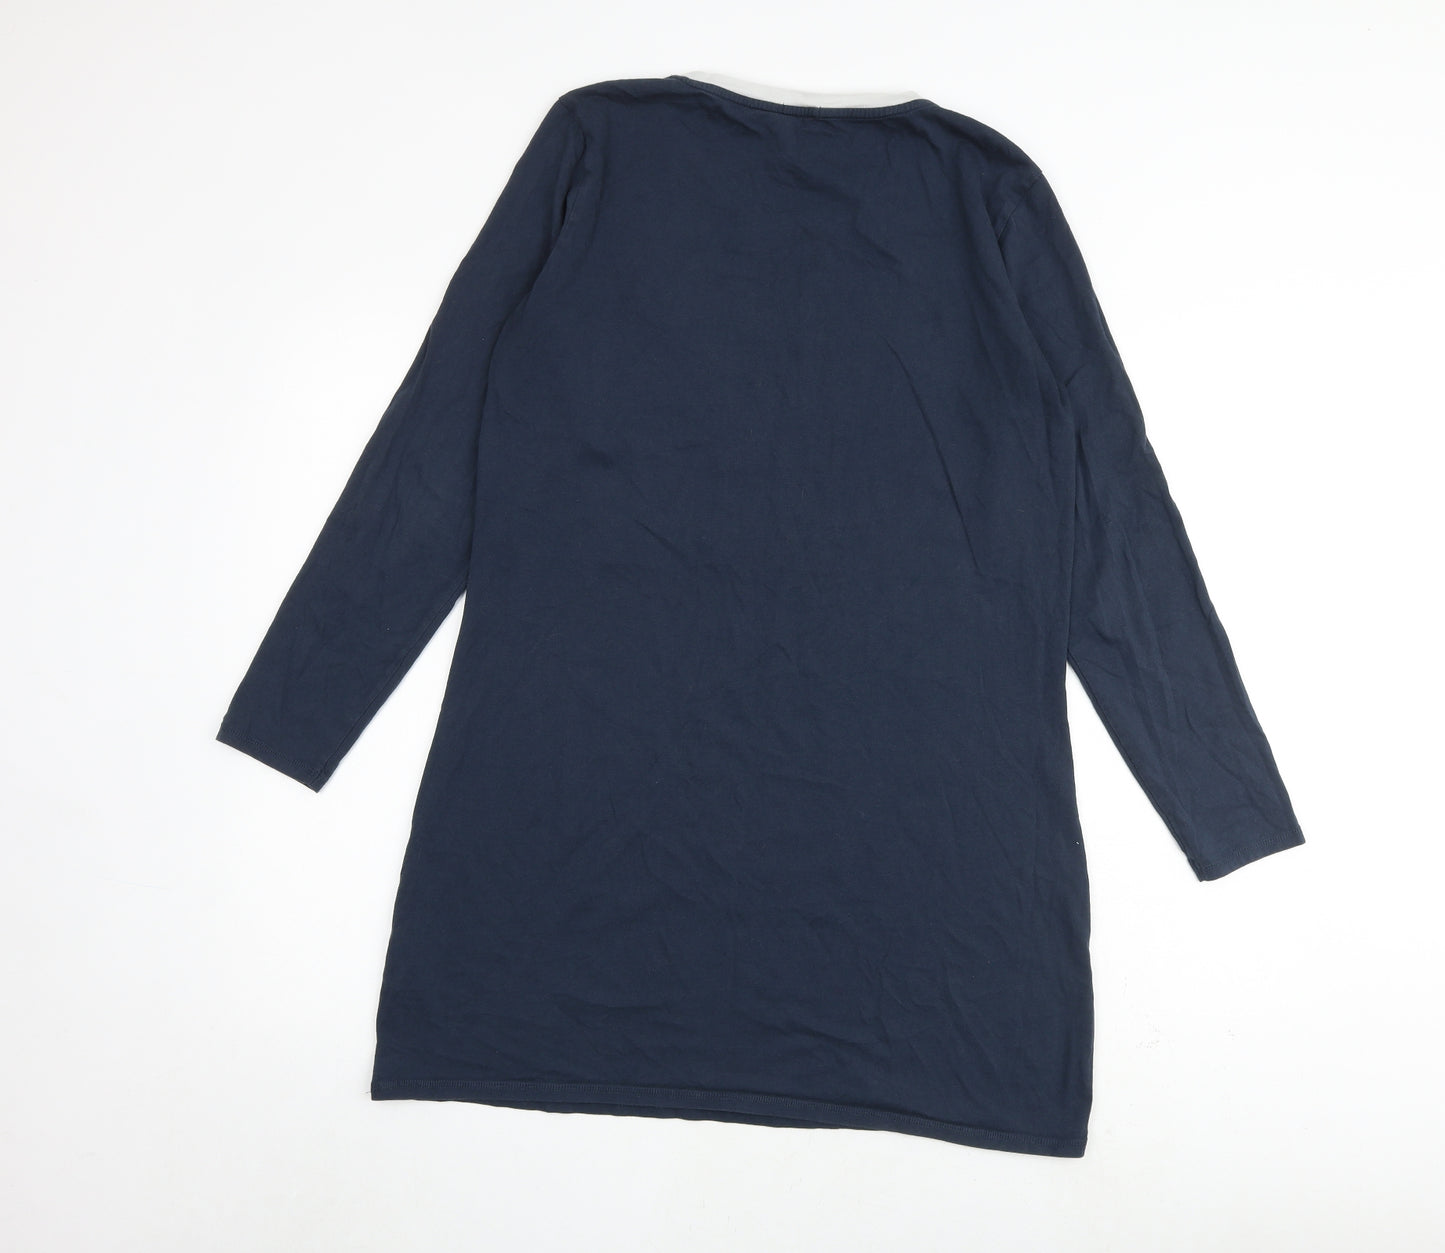 Tommy Hilfiger Womens Blue 100% Cotton A-Line Size L Round Neck Pullover - Tommy